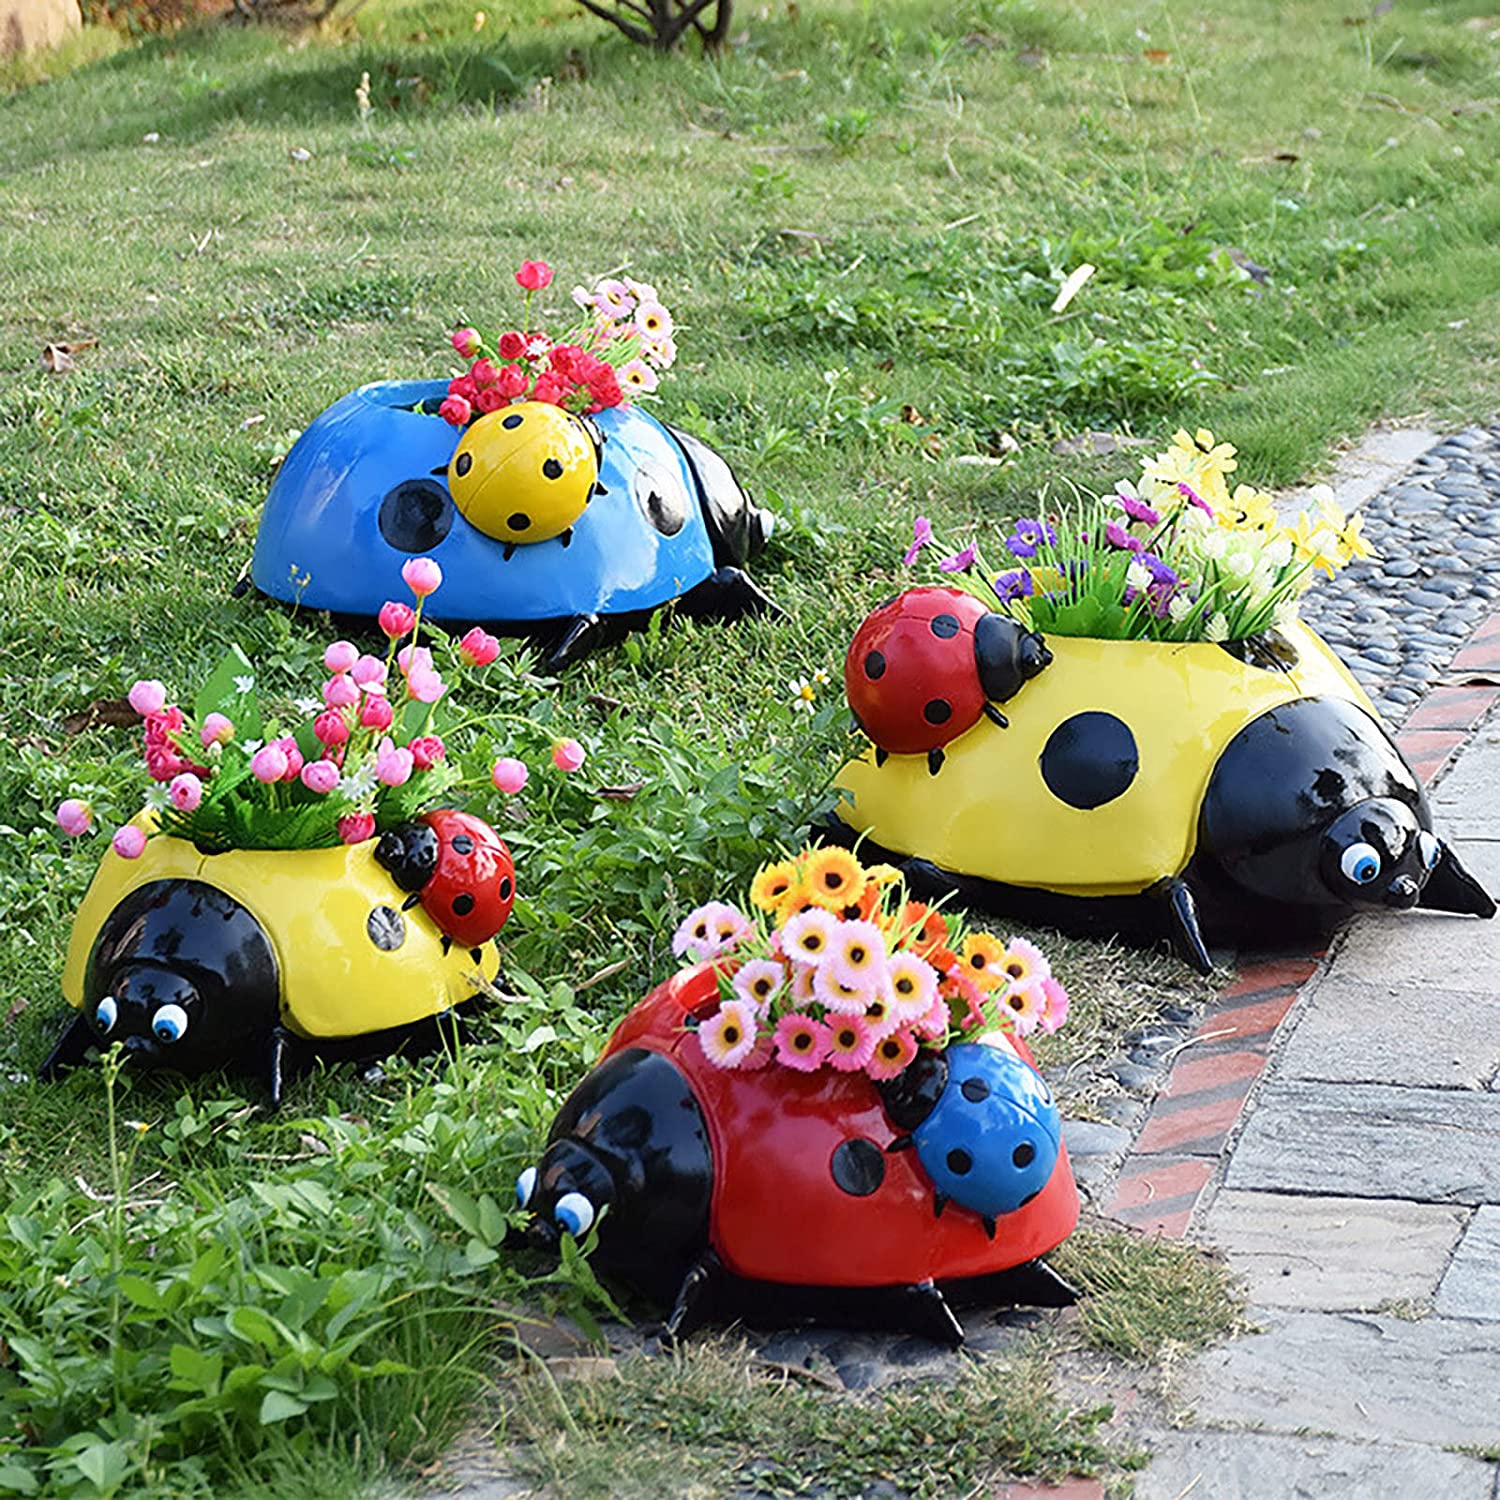 Resin Ladybugs Flower Pot Garden Decorations, Simulation Animal Ladybugs Flower Pot,Outdoor and Garden Decor Patio Yard Planter Flower Pot Indoor or Outdoor Decorations (Red) - image 3 of 7